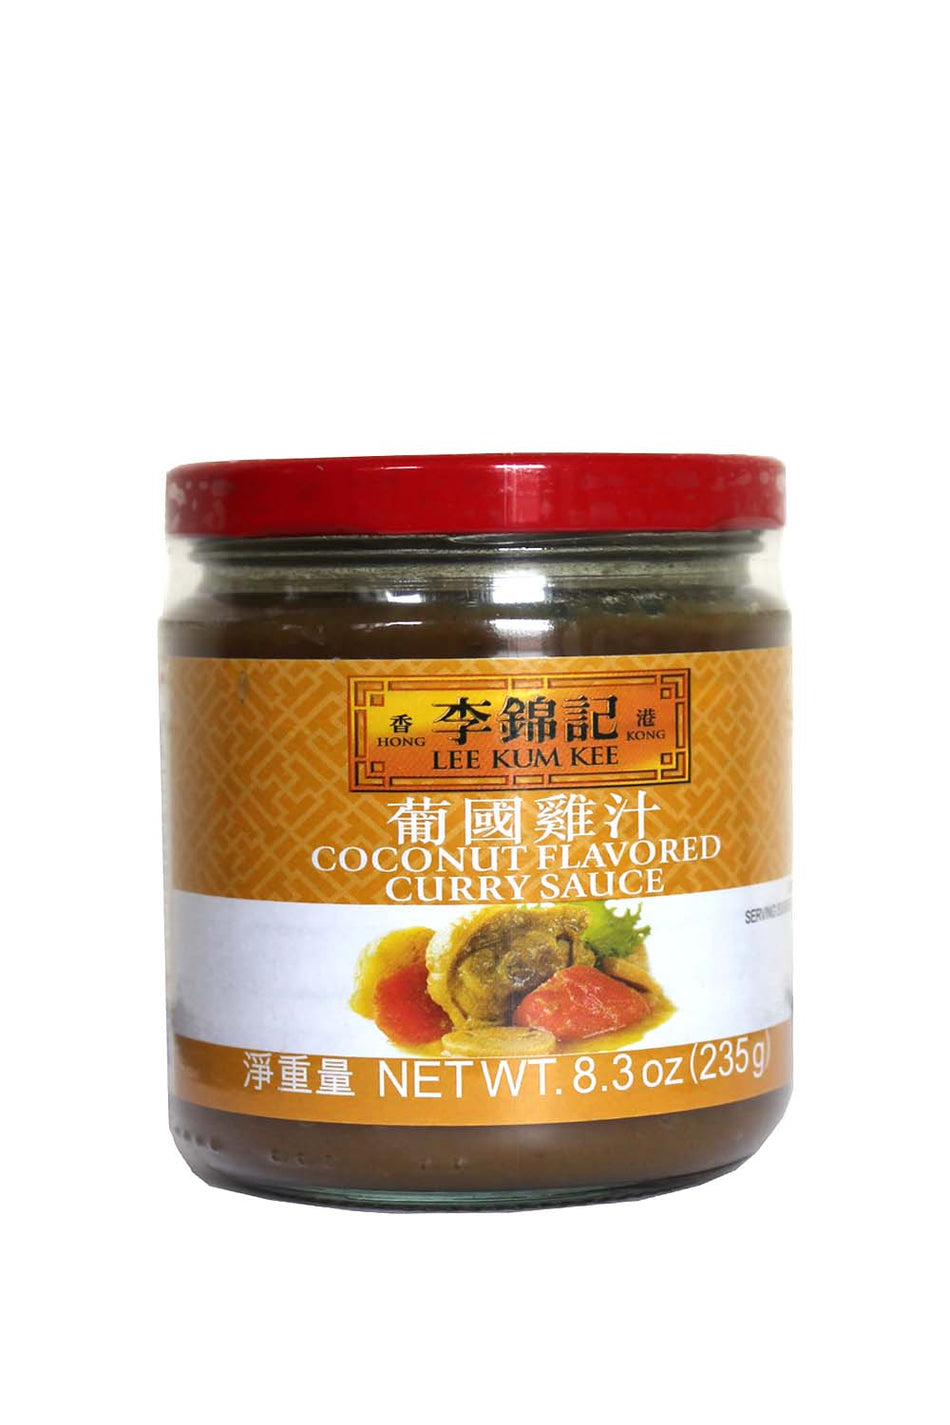 Lee Kum Kee  Coconut Flavored Curry Sauce